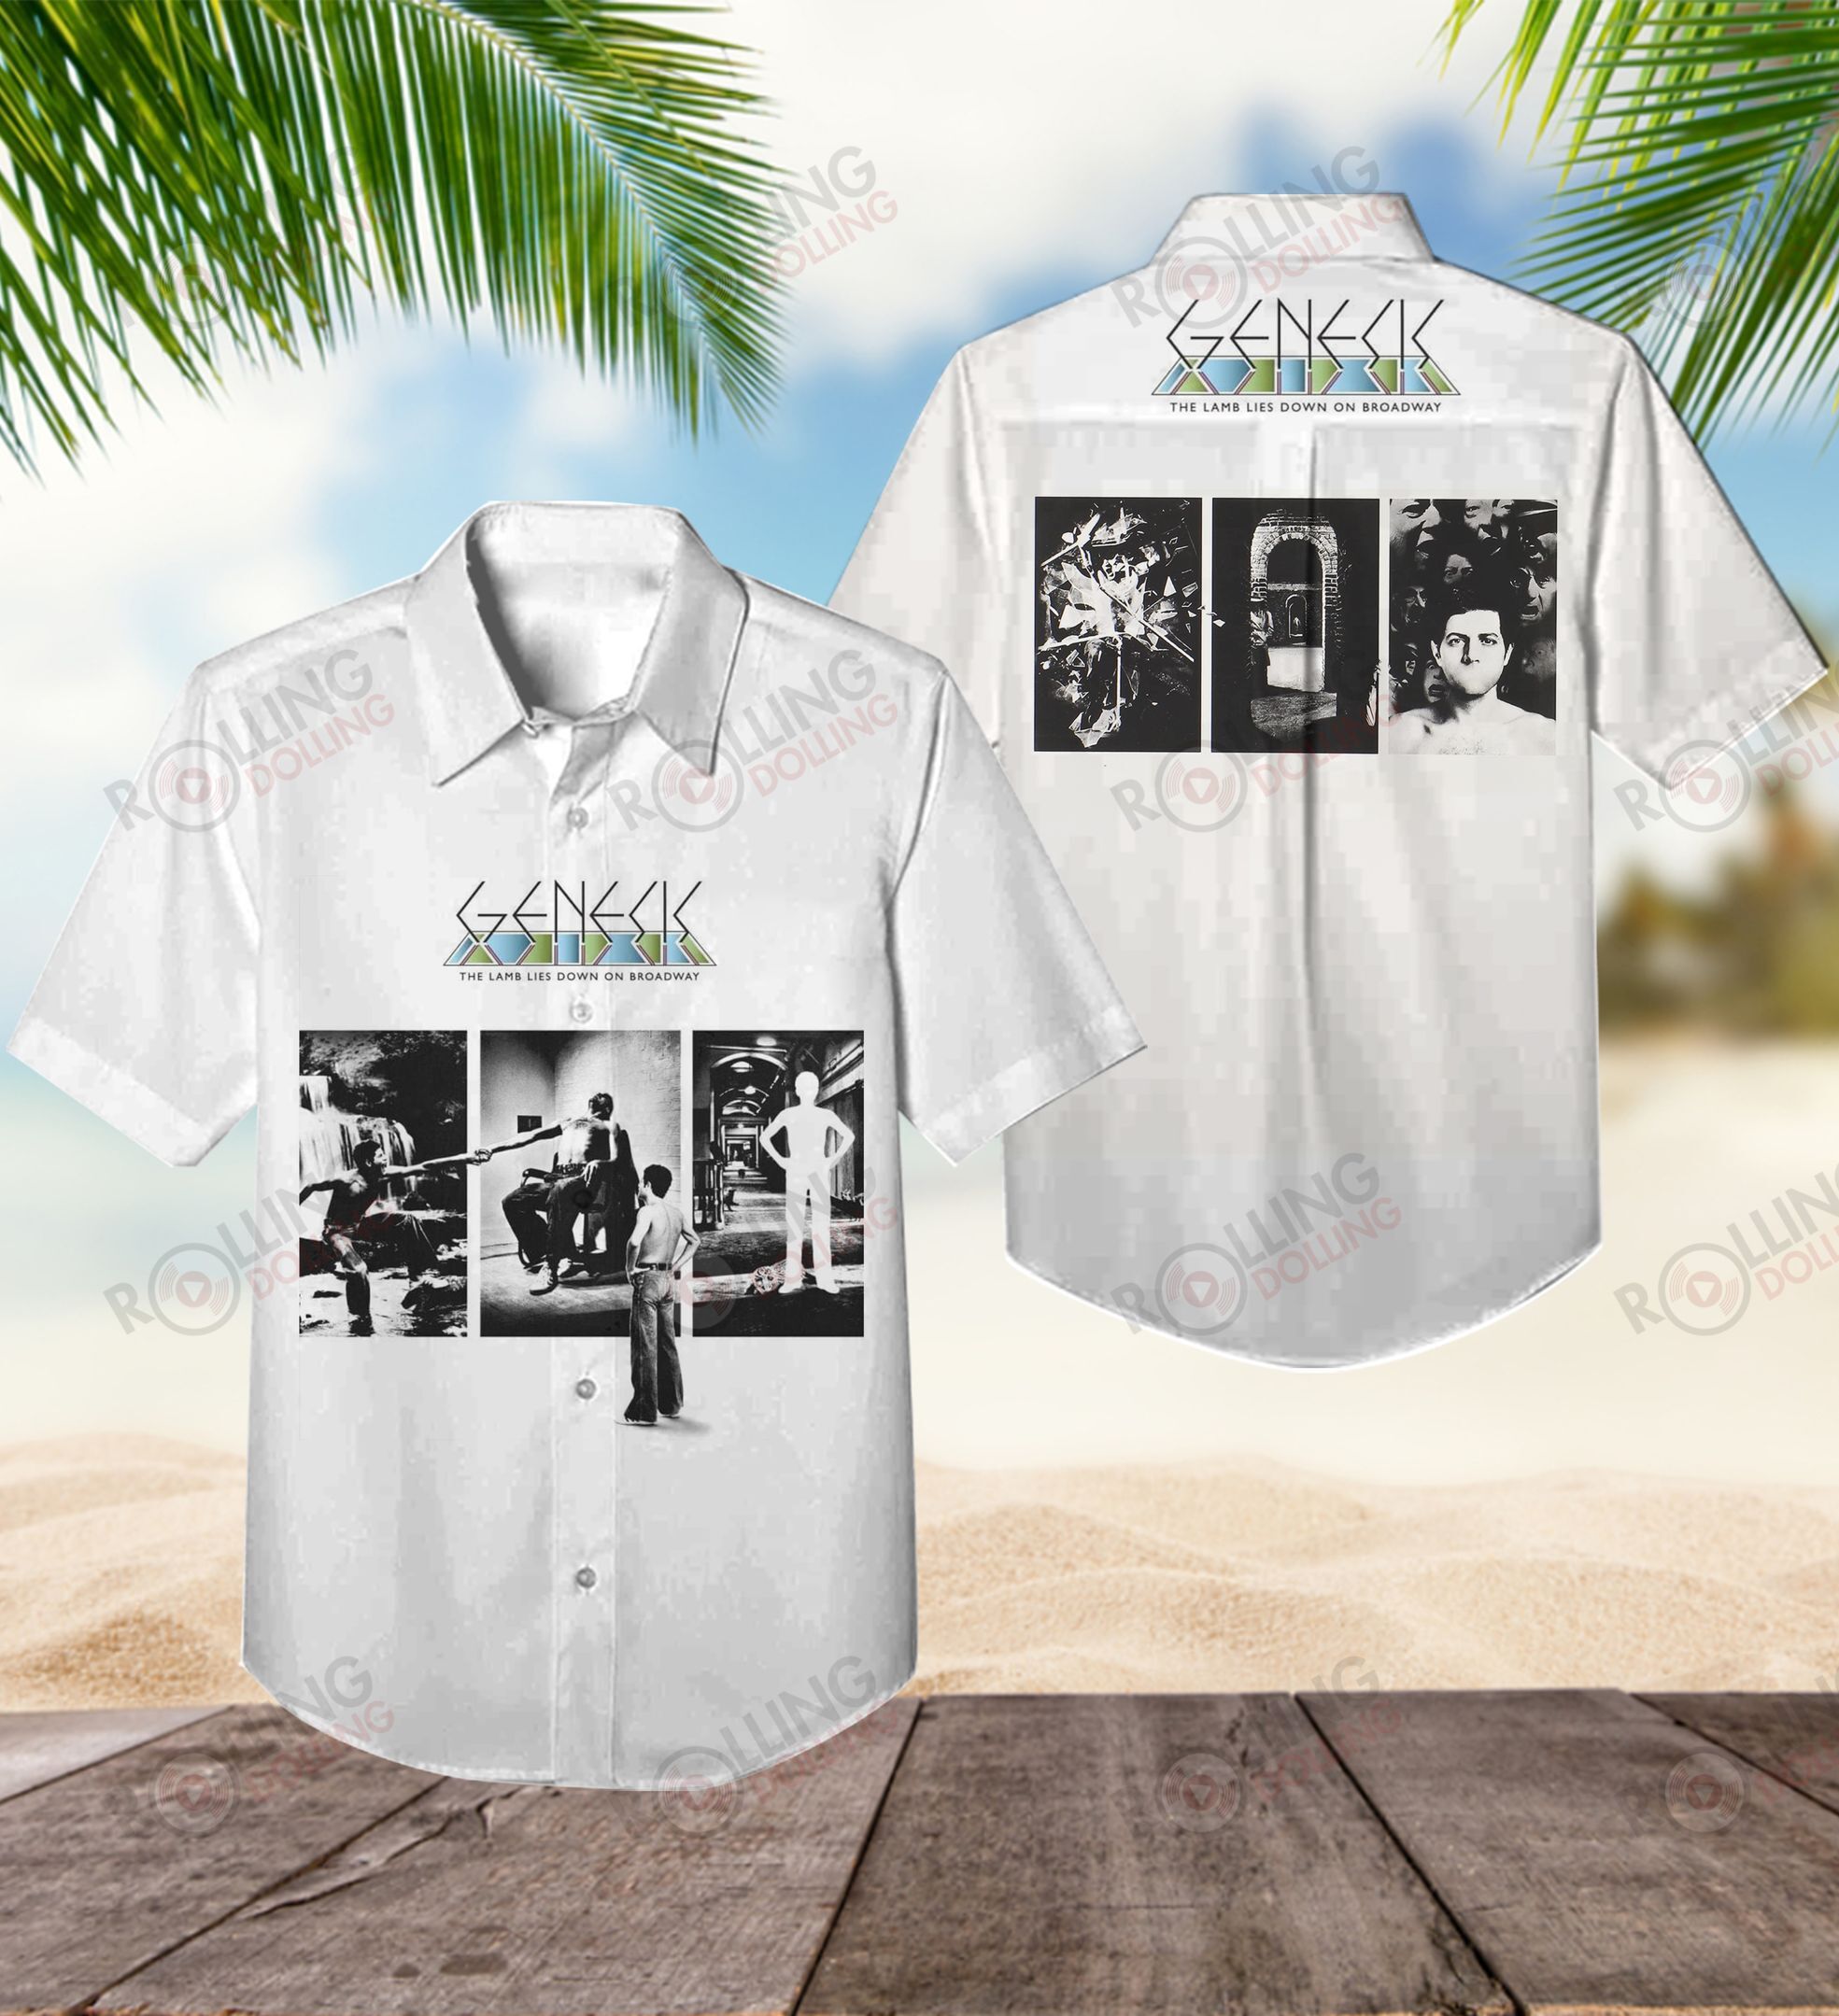 Check out these top 100+ Hawaiian shirt so cool for rock fans 337